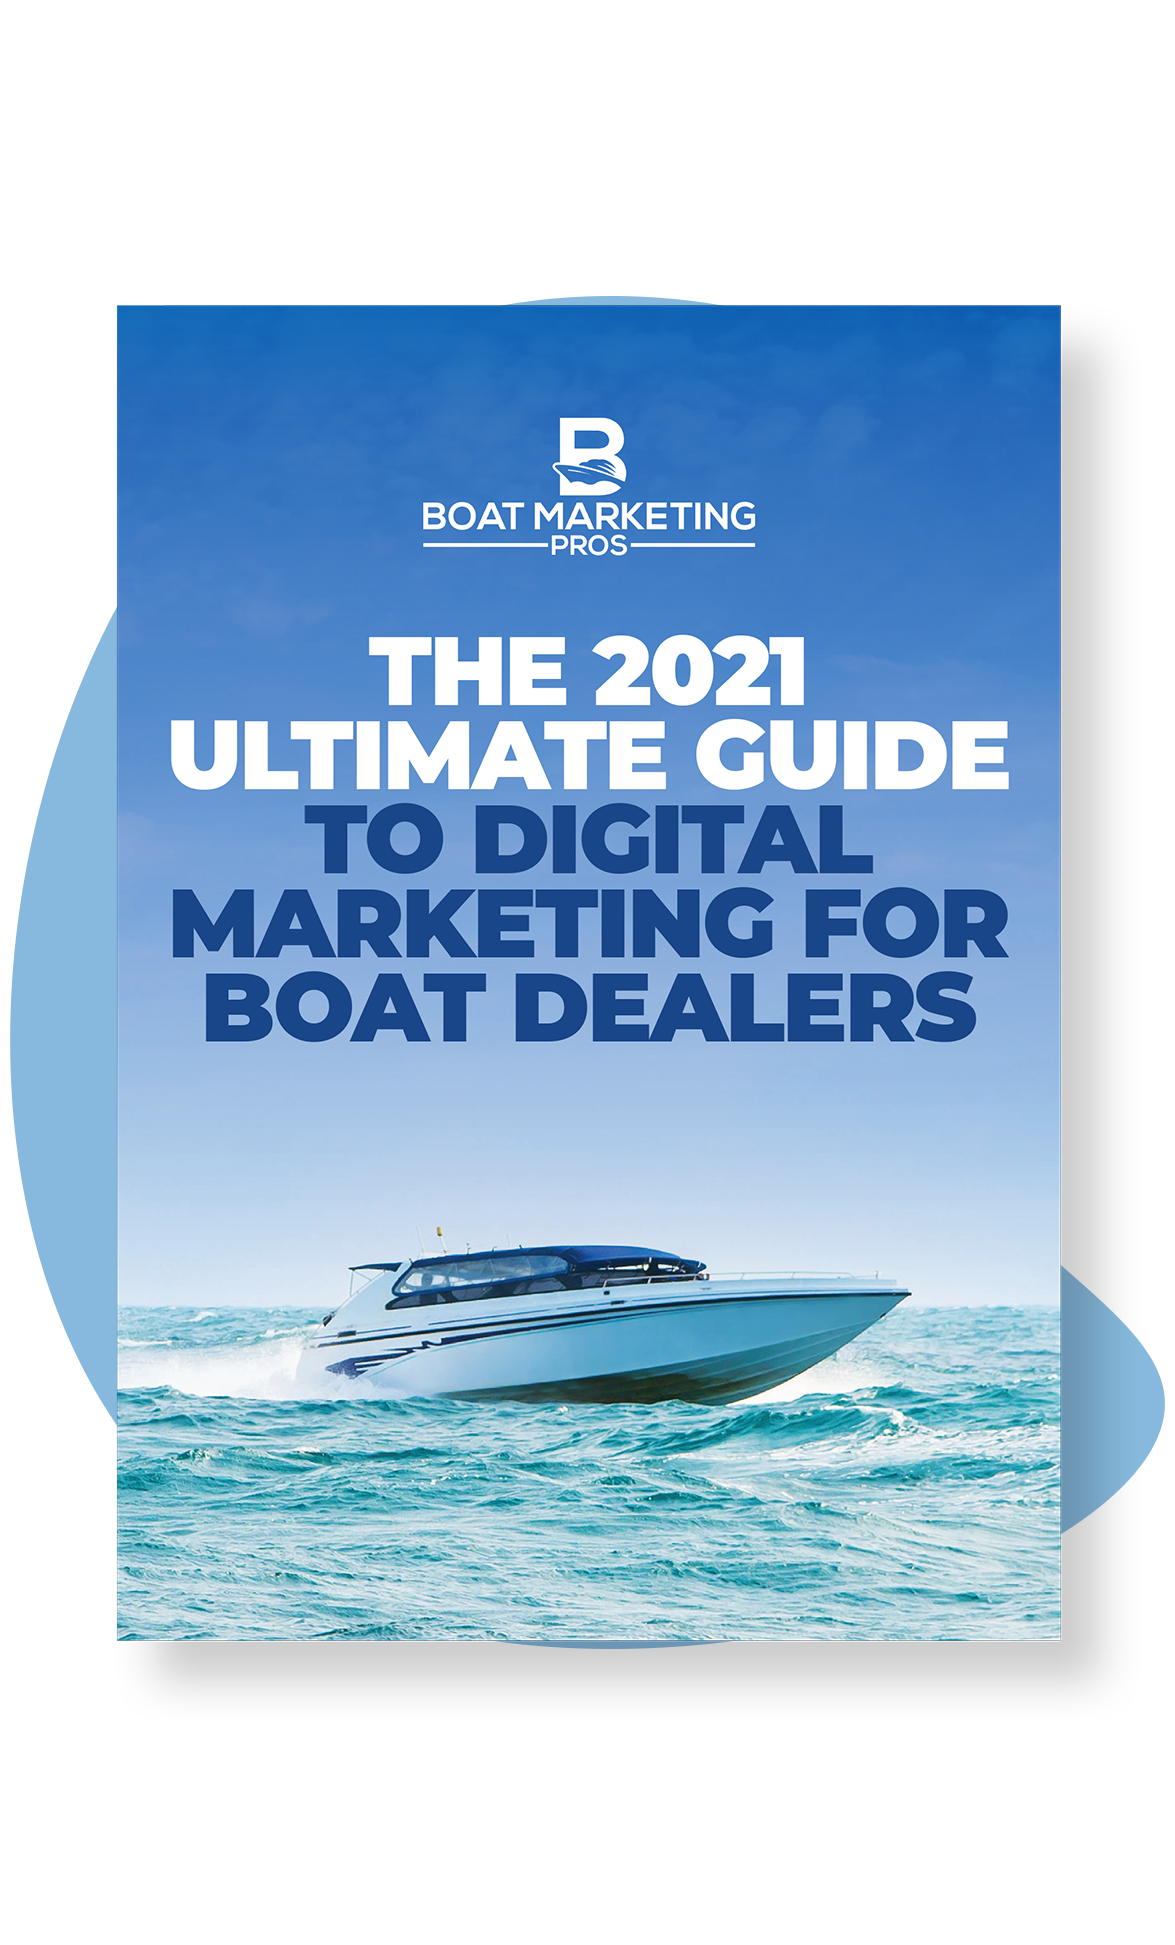 The 2021 Ultimate Guide to Digital Marketing for Boat Dealers